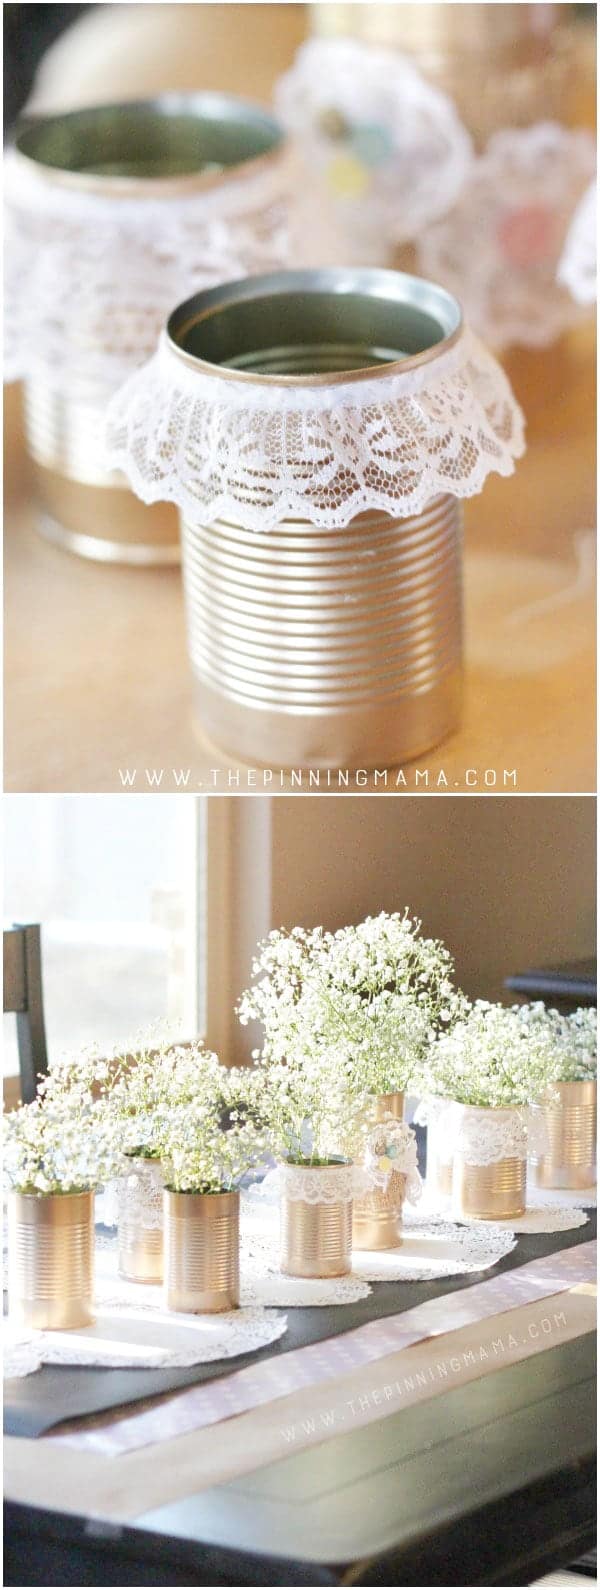 Gold and Lace Tin Can Table Centerpiece - How beautiful would this be for a vintage wedding or a shabby chic baby shower or bridal shower?  This is an easy to make craft idea that turns into stunning decor!